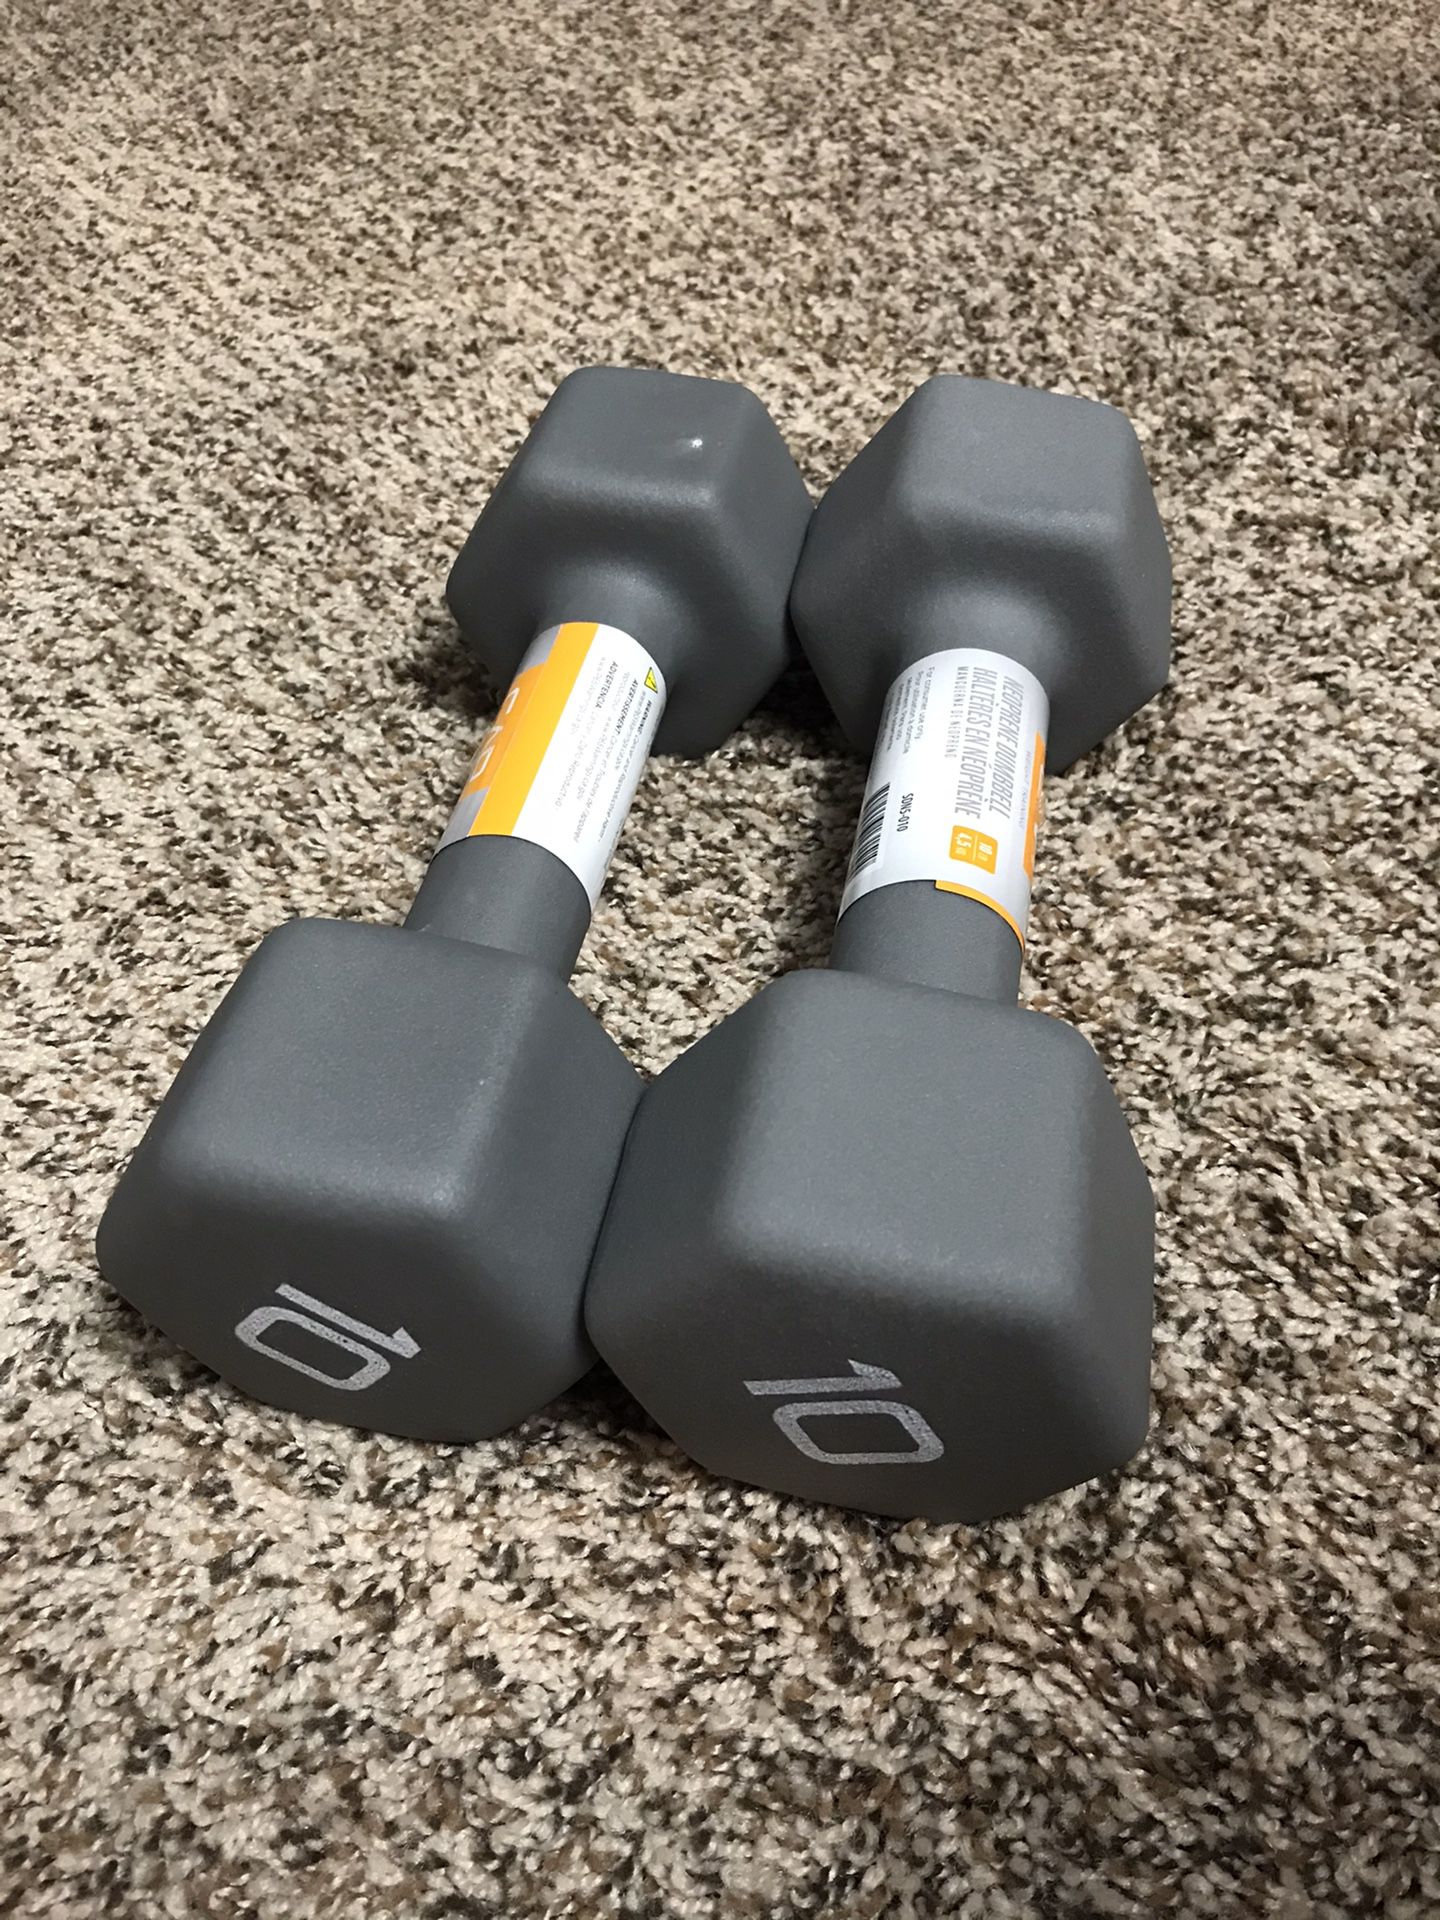 10 lbs cap neoprene dumbbells. These weights are brand new